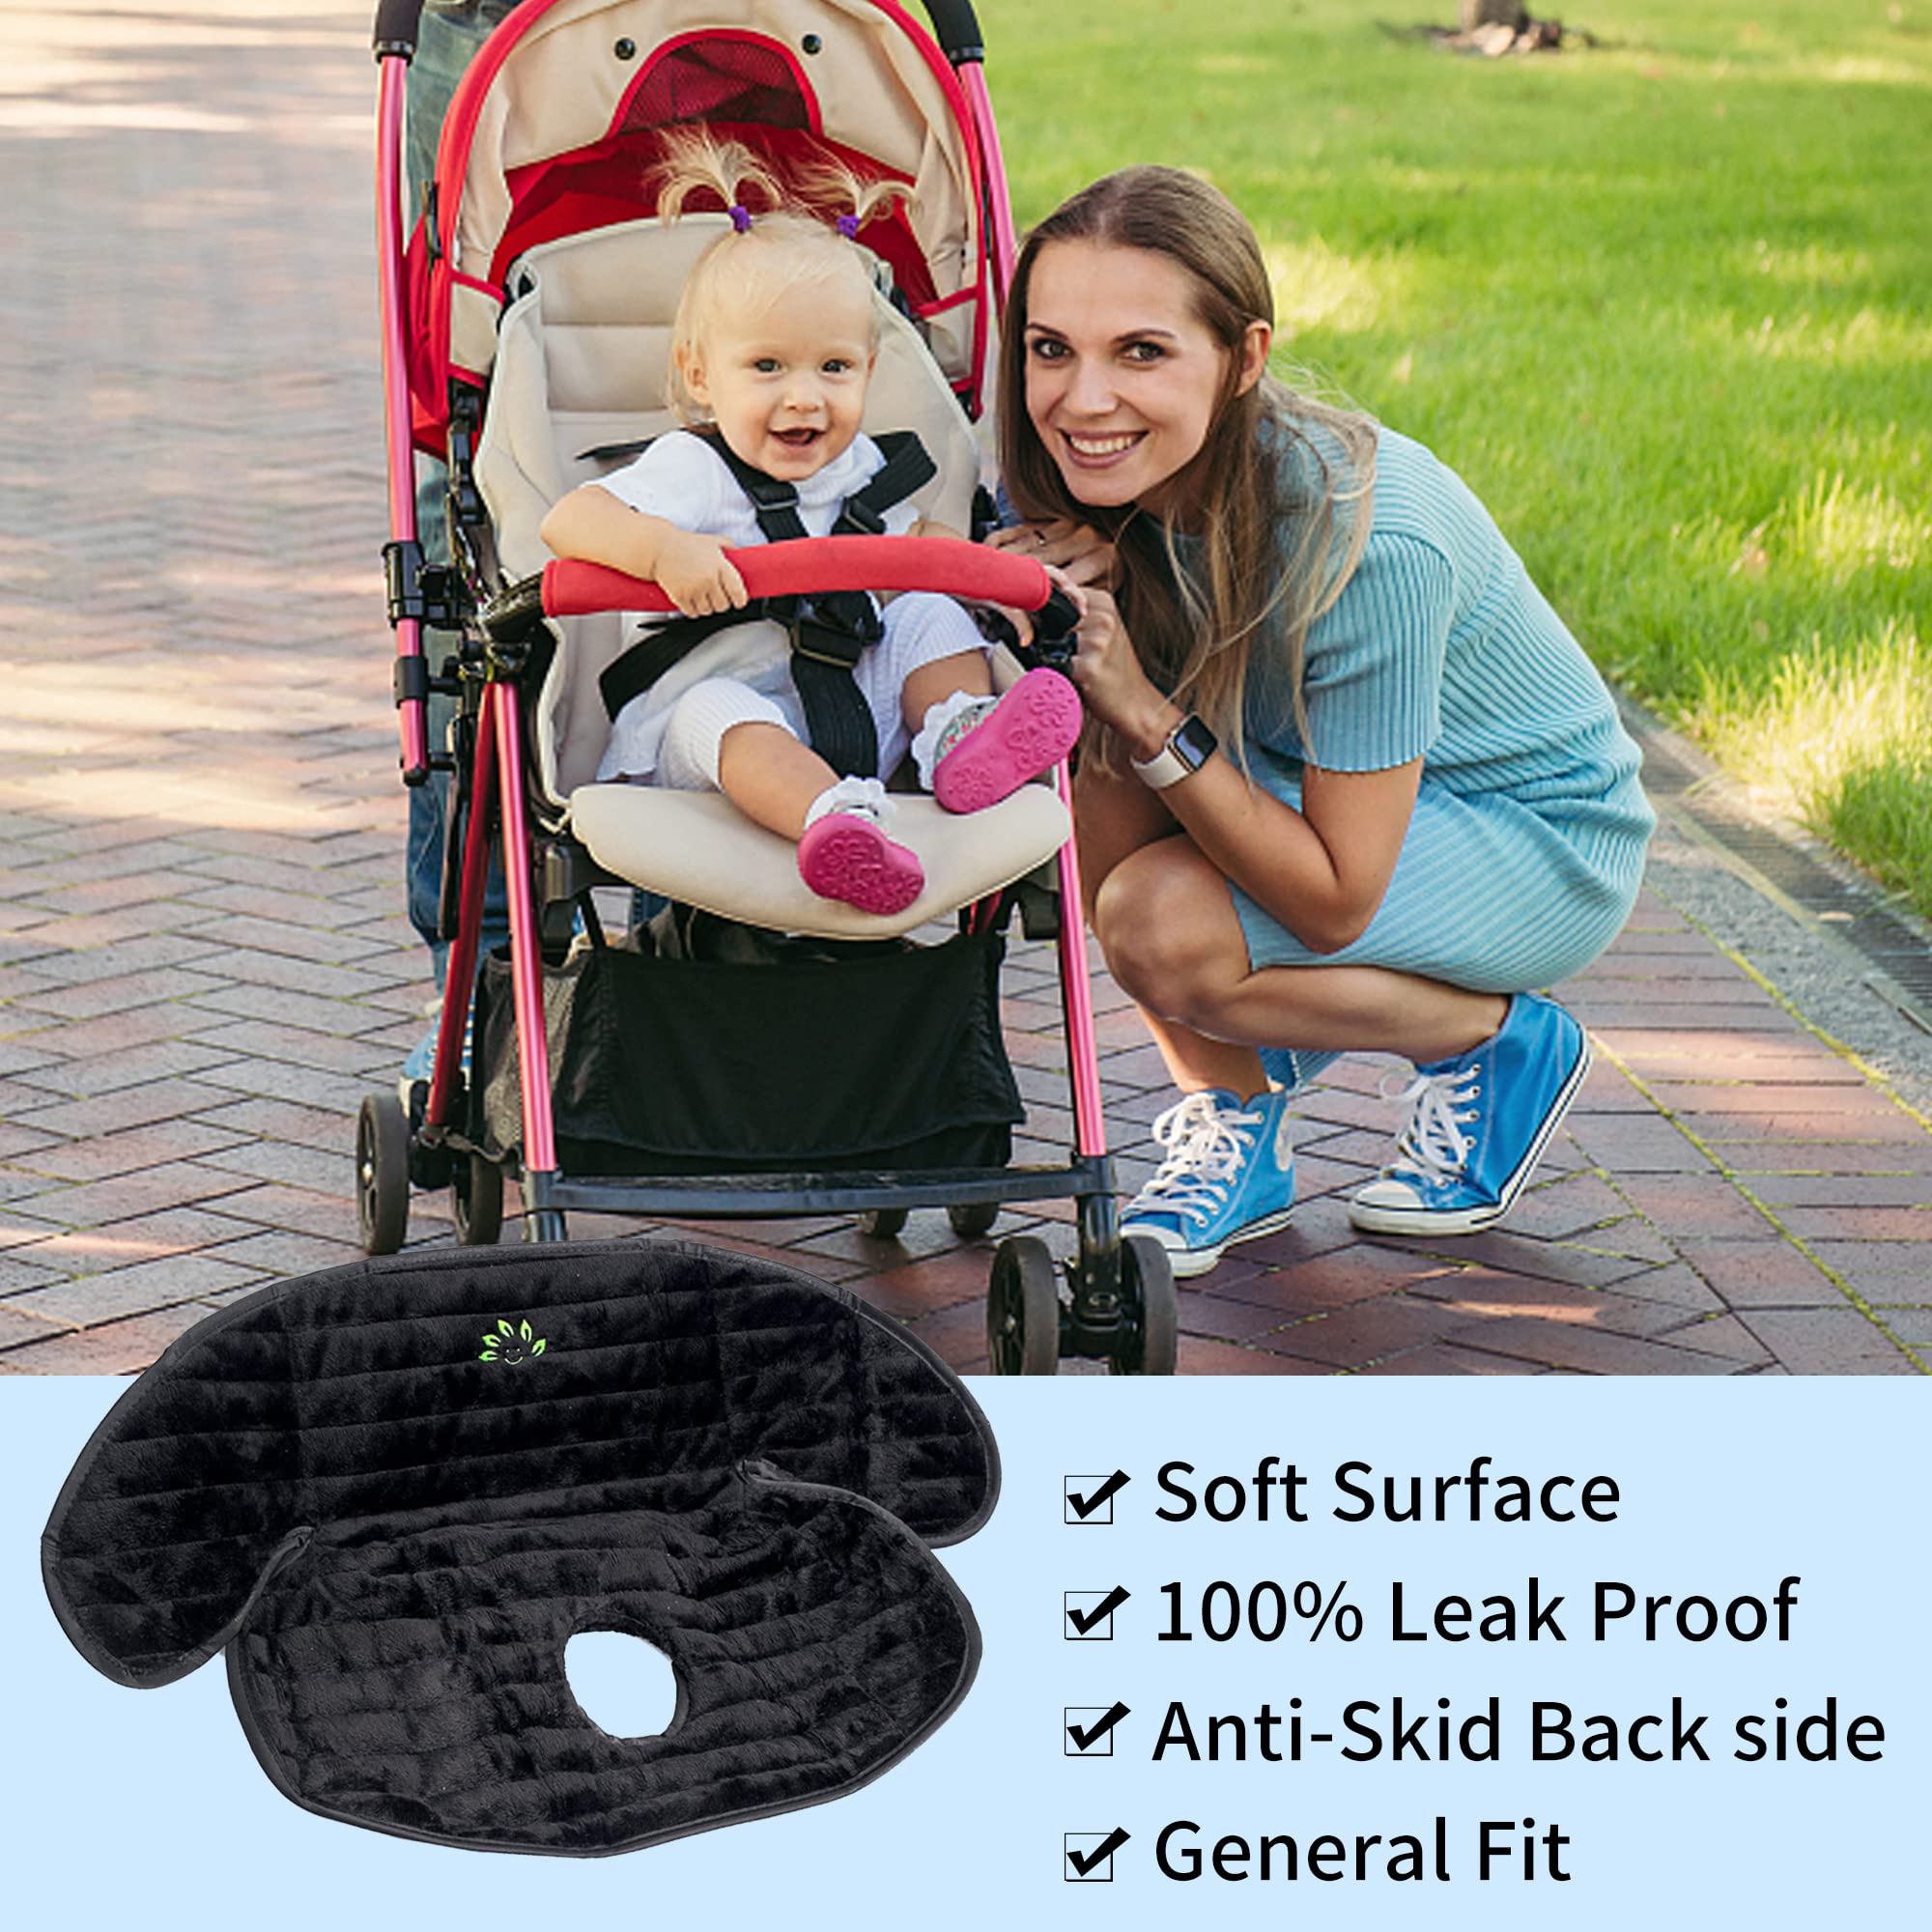 Piddle Pad Car Seat Protector, 2PCS Waterproof Carseat Liner Toddlers and Infants, Piddle Pad for Safety Carseats Strollers Potty Training and Dinner Chair Machine Wash and Dry Anti Slip(Black+Black)